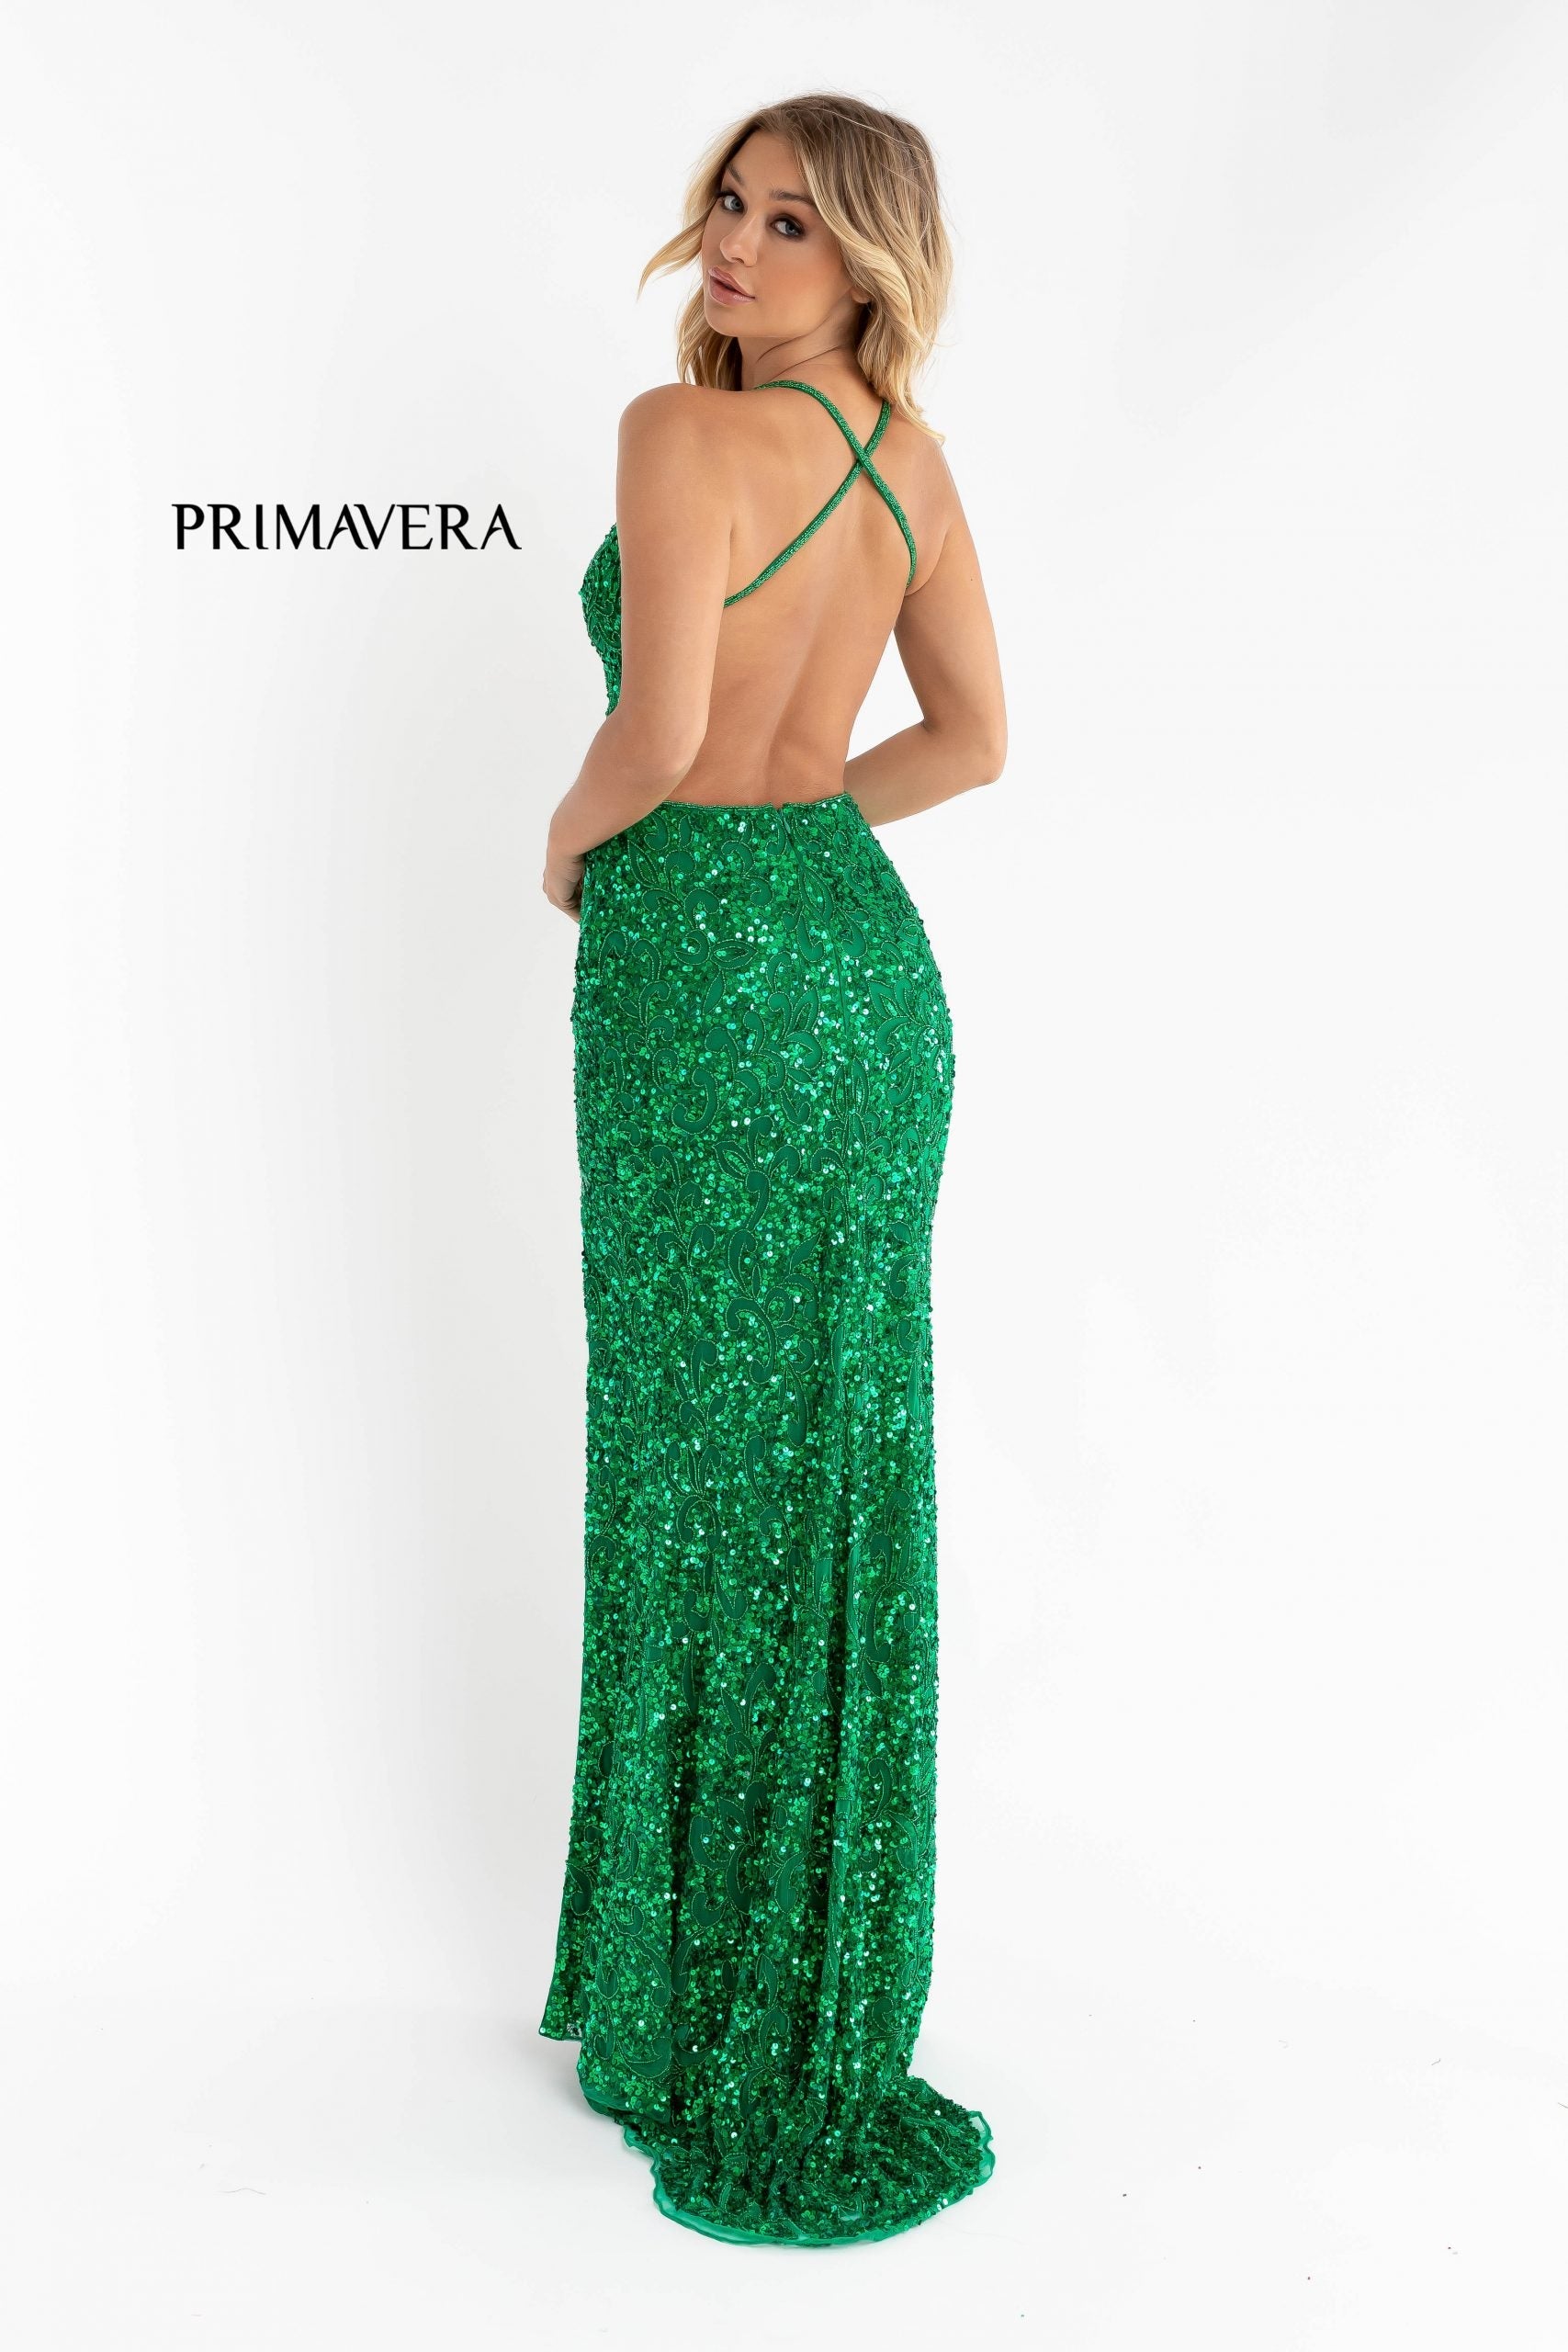 Primavera Couture 3295 Exclusive  Prom Dress, Formal Evening Gown.  This exclusive prom dress is designed with sequins throughout.  I has a V neckline with beaded spaghetti straps that crisscross in the open back.  It is long with a left side slit.  Available Colors:  FUSHIA,CREAM,EMERALD,IVORY,PEACOCK,BLACK,MIDNIGHT,NEON LILAC,NEON PINK,FORREST GREEN,PURPLE,TURQUOISE,CORAL,BLUE,RED,LIGHT BLUE,NEON SAGE